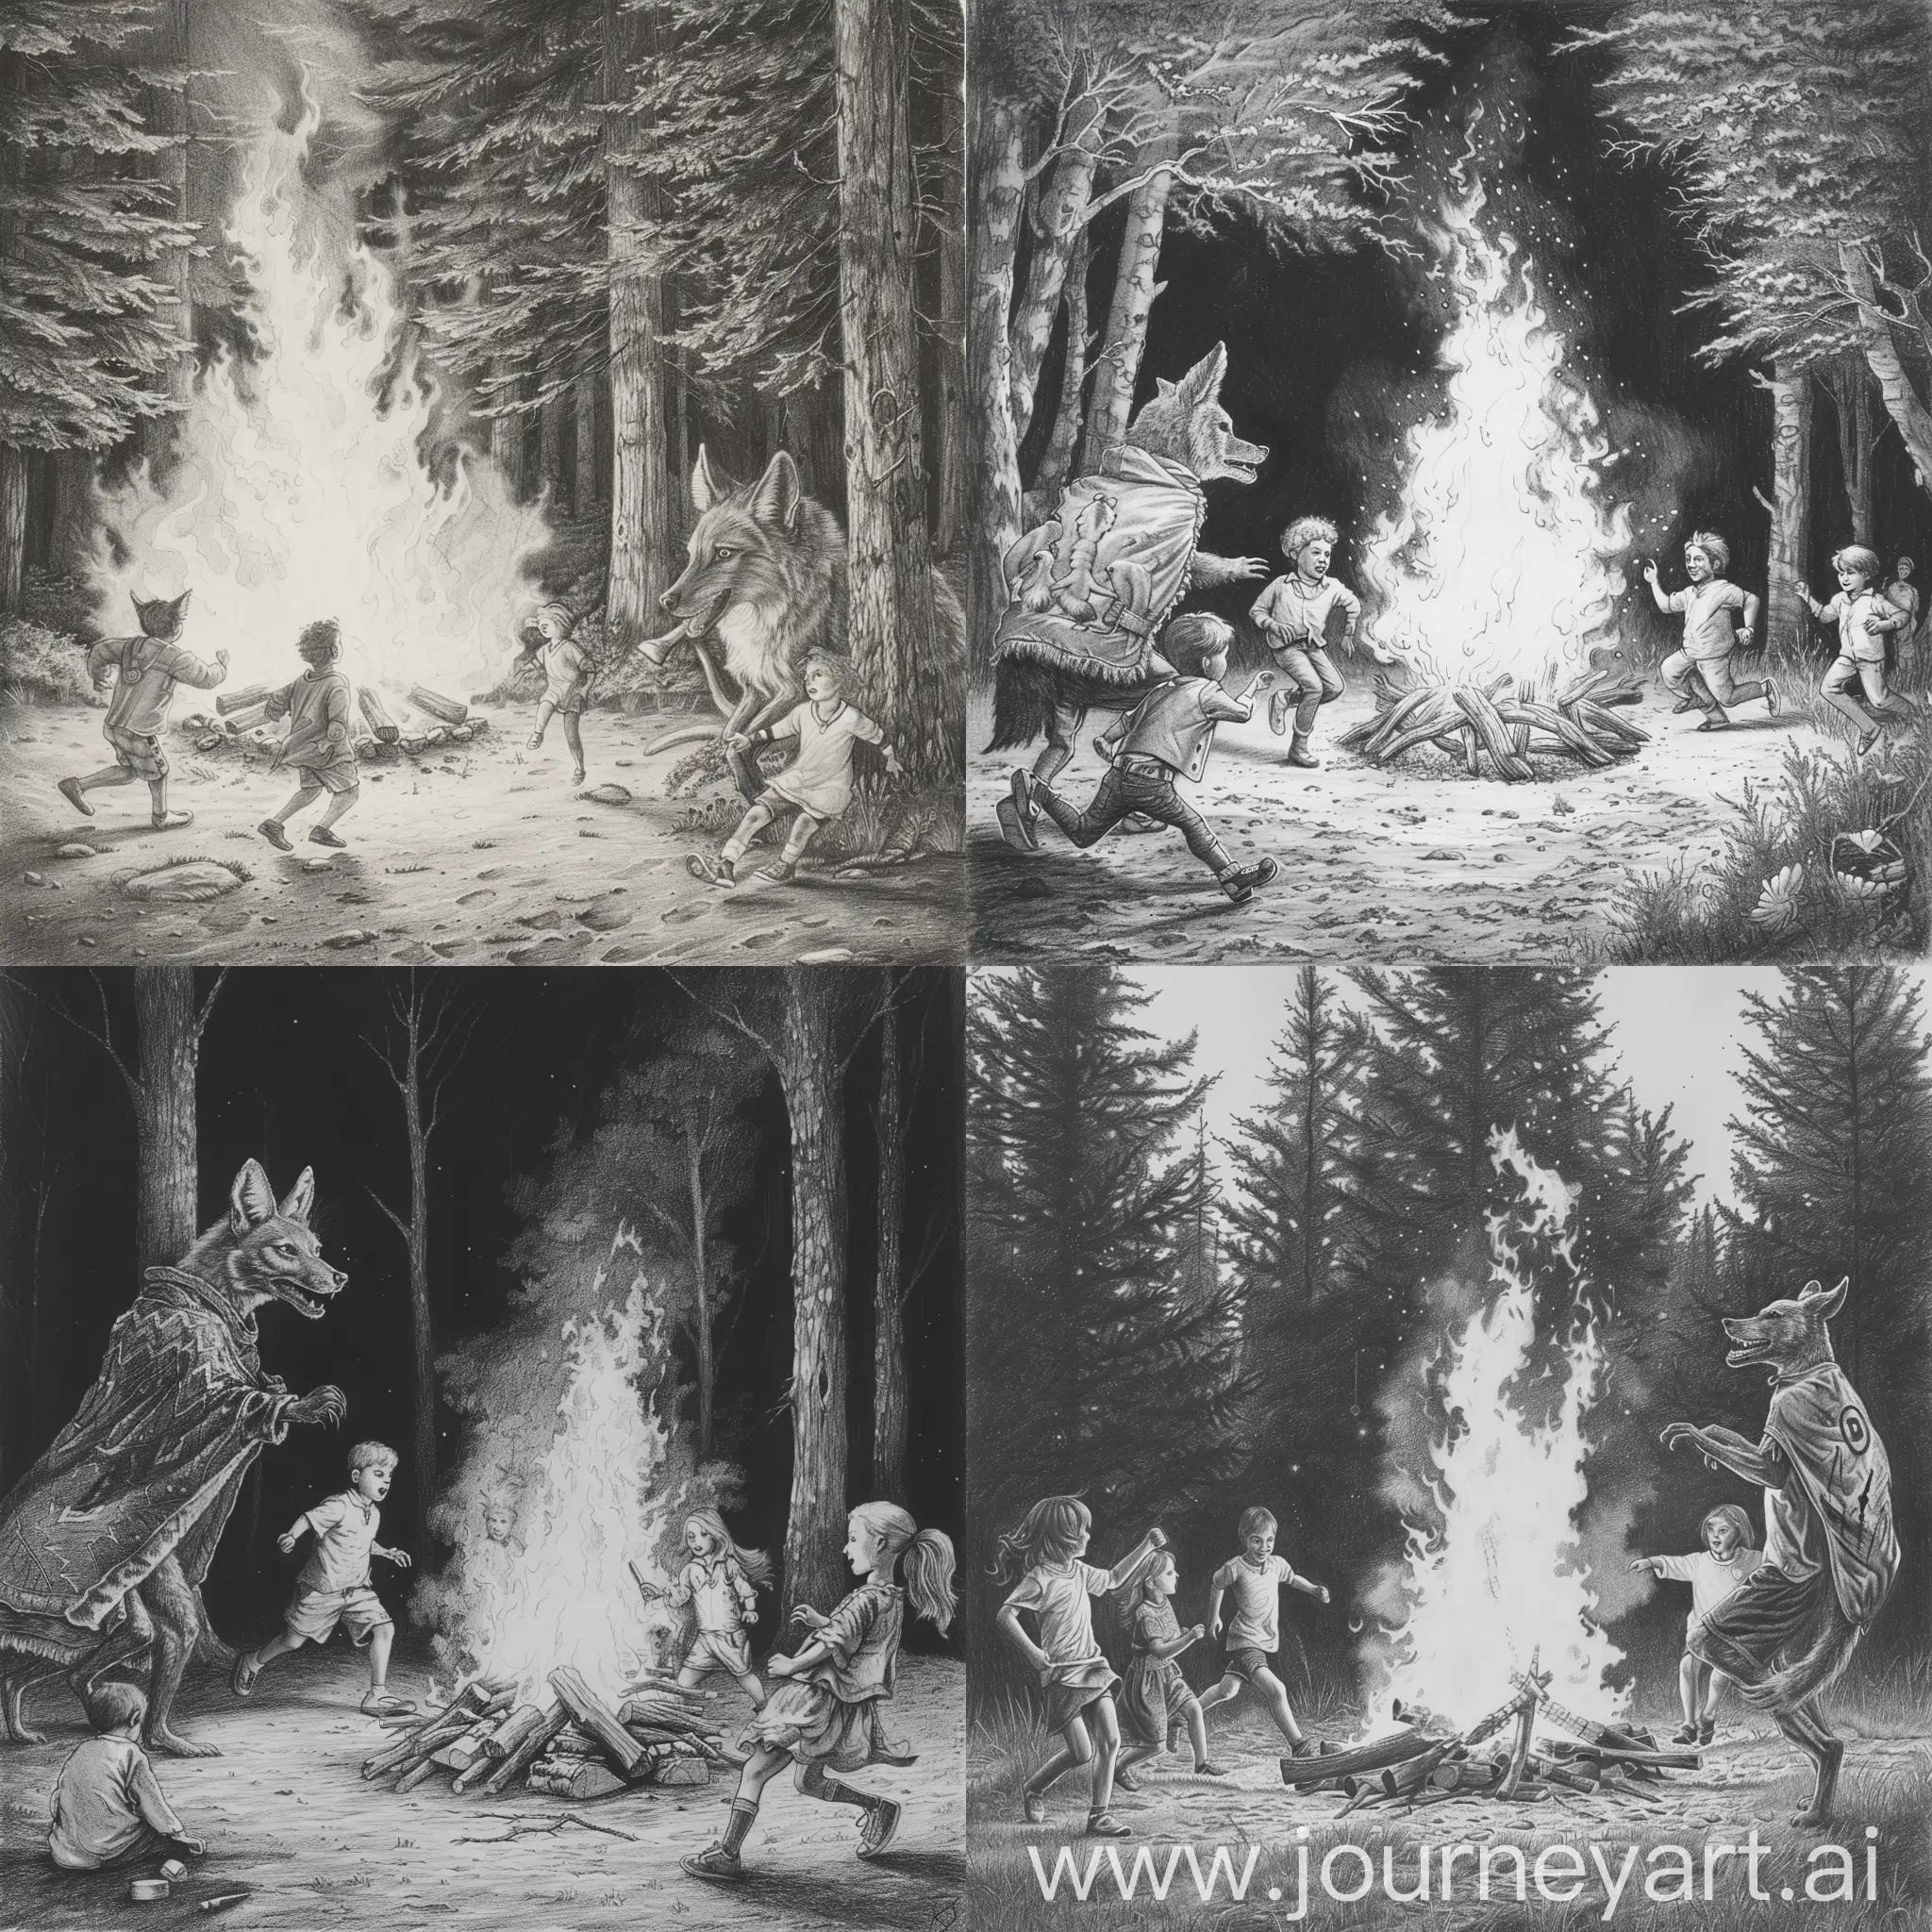 Children-Playing-Around-Bonfire-Watched-by-Anthropomorphic-Jackal-in-Forest-Clearing